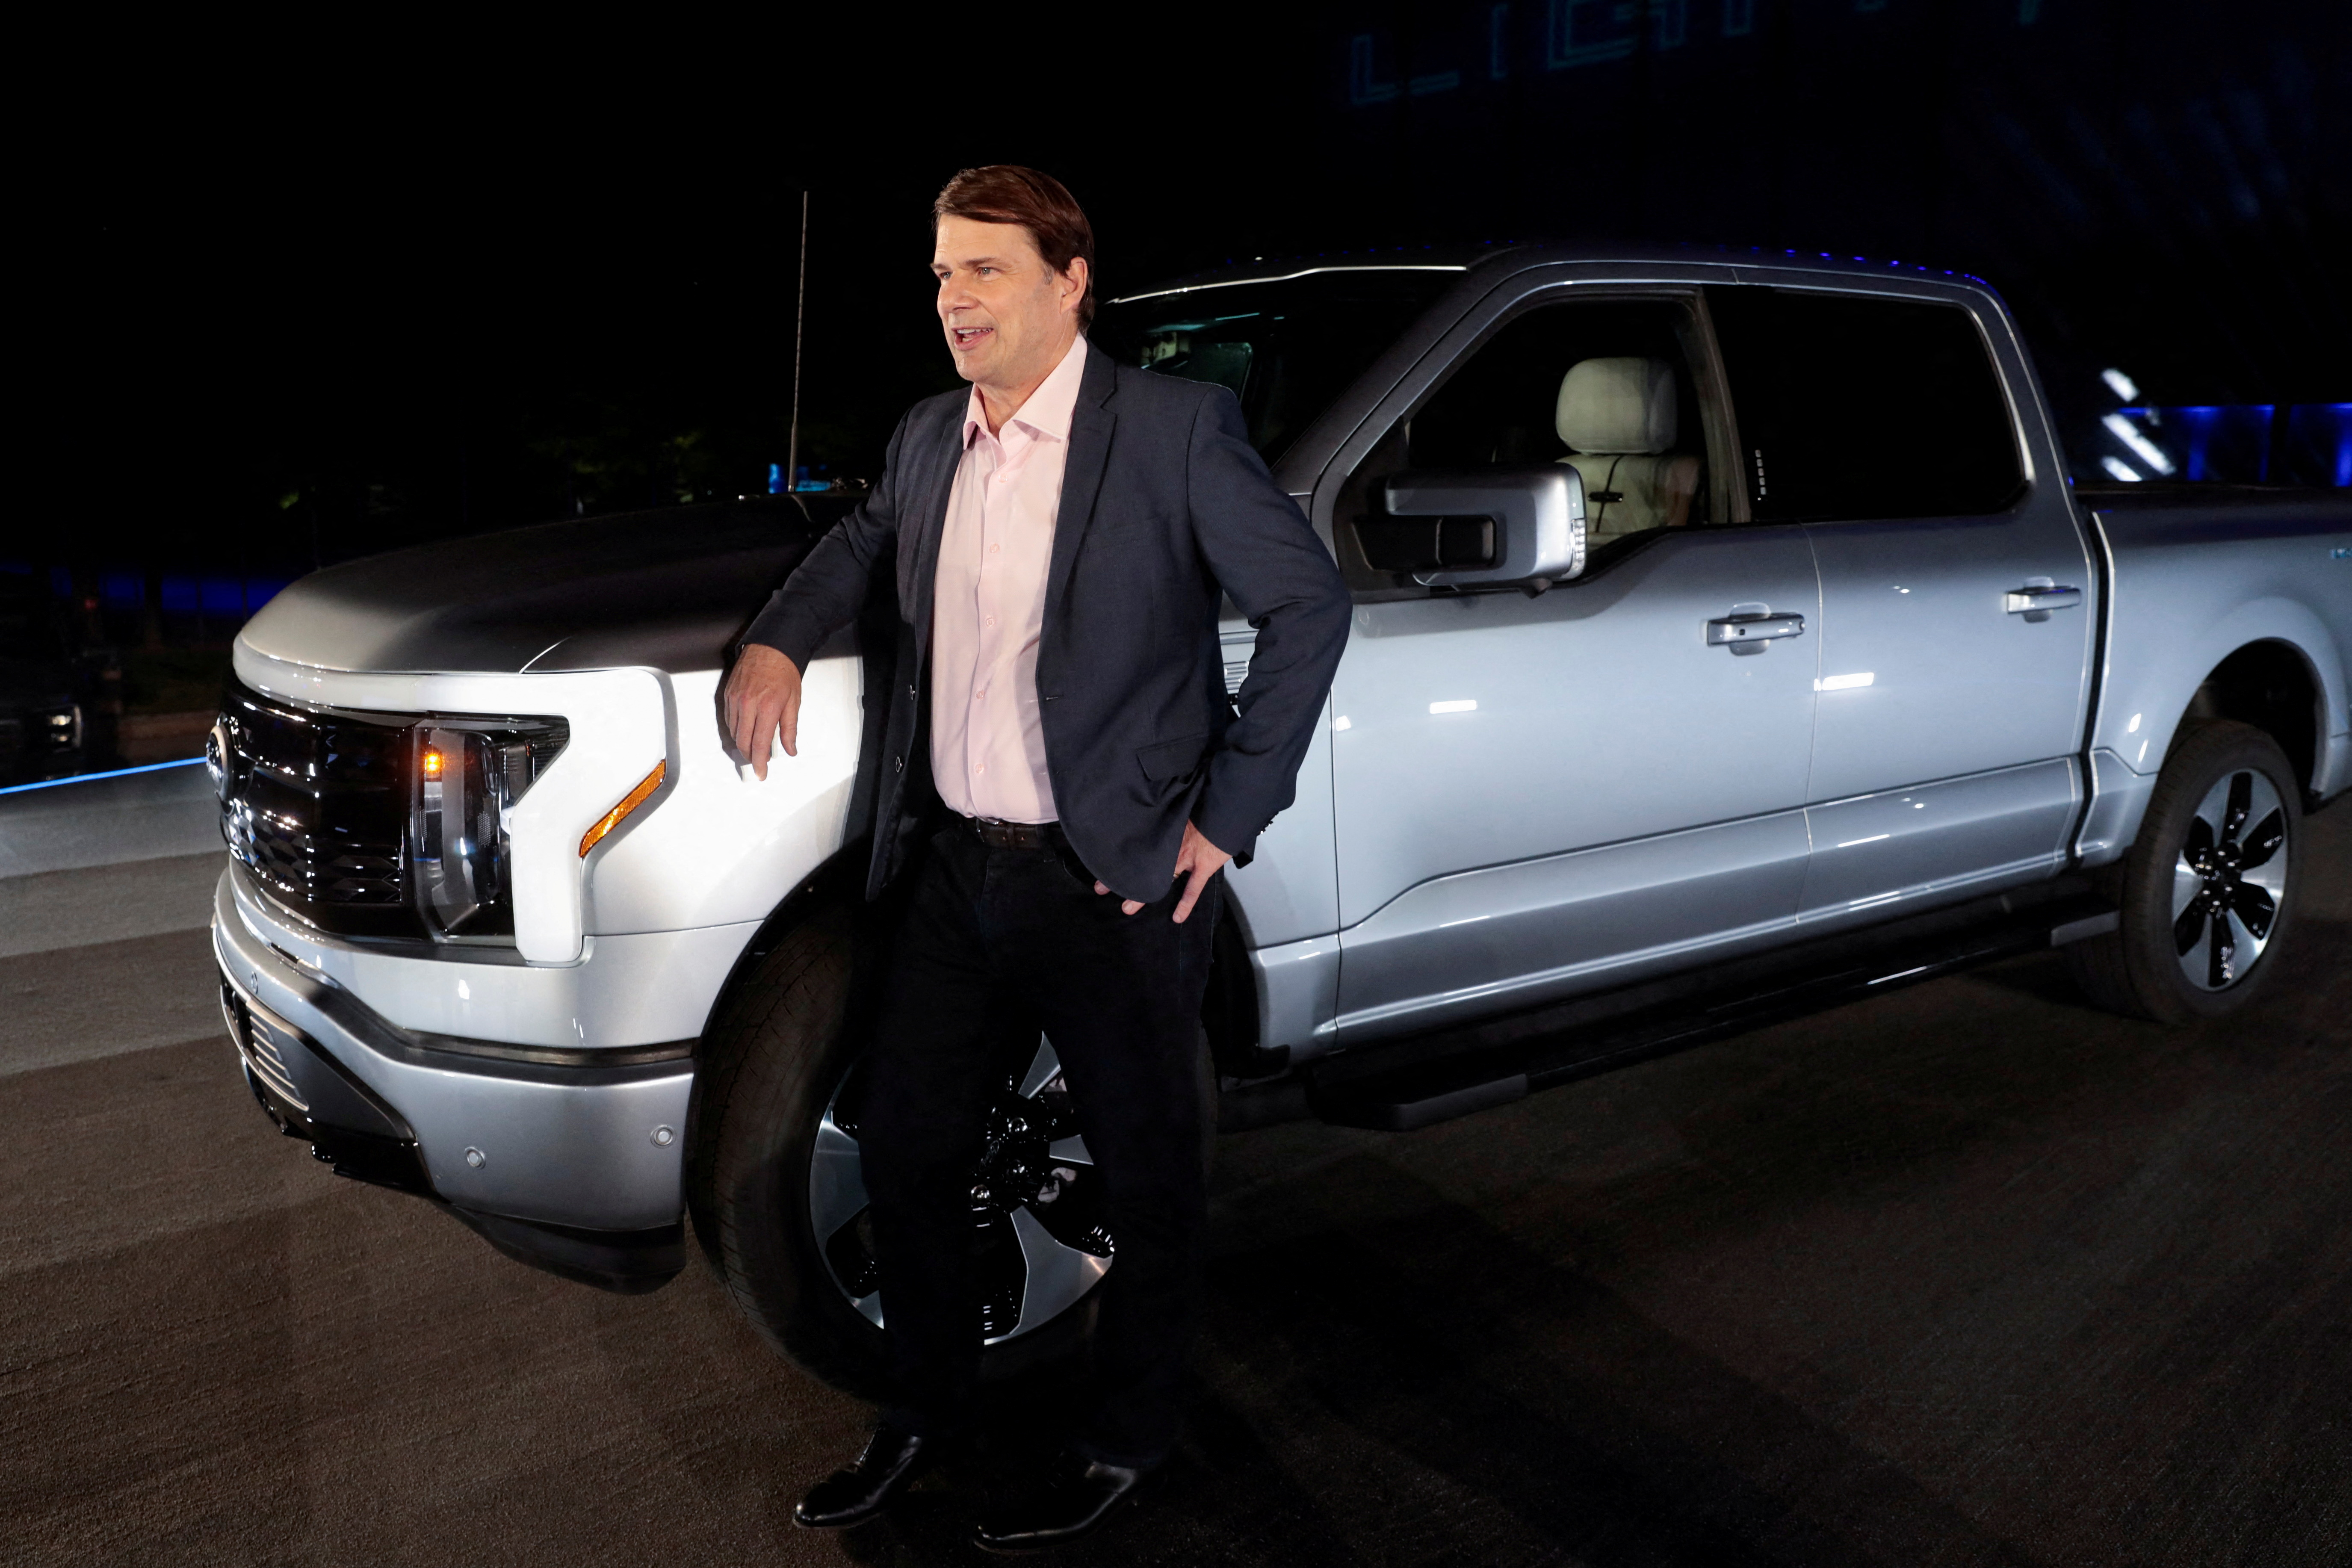 Unveiling of the all-electric Ford F-150 Lightning pickup truck, in Dearborn